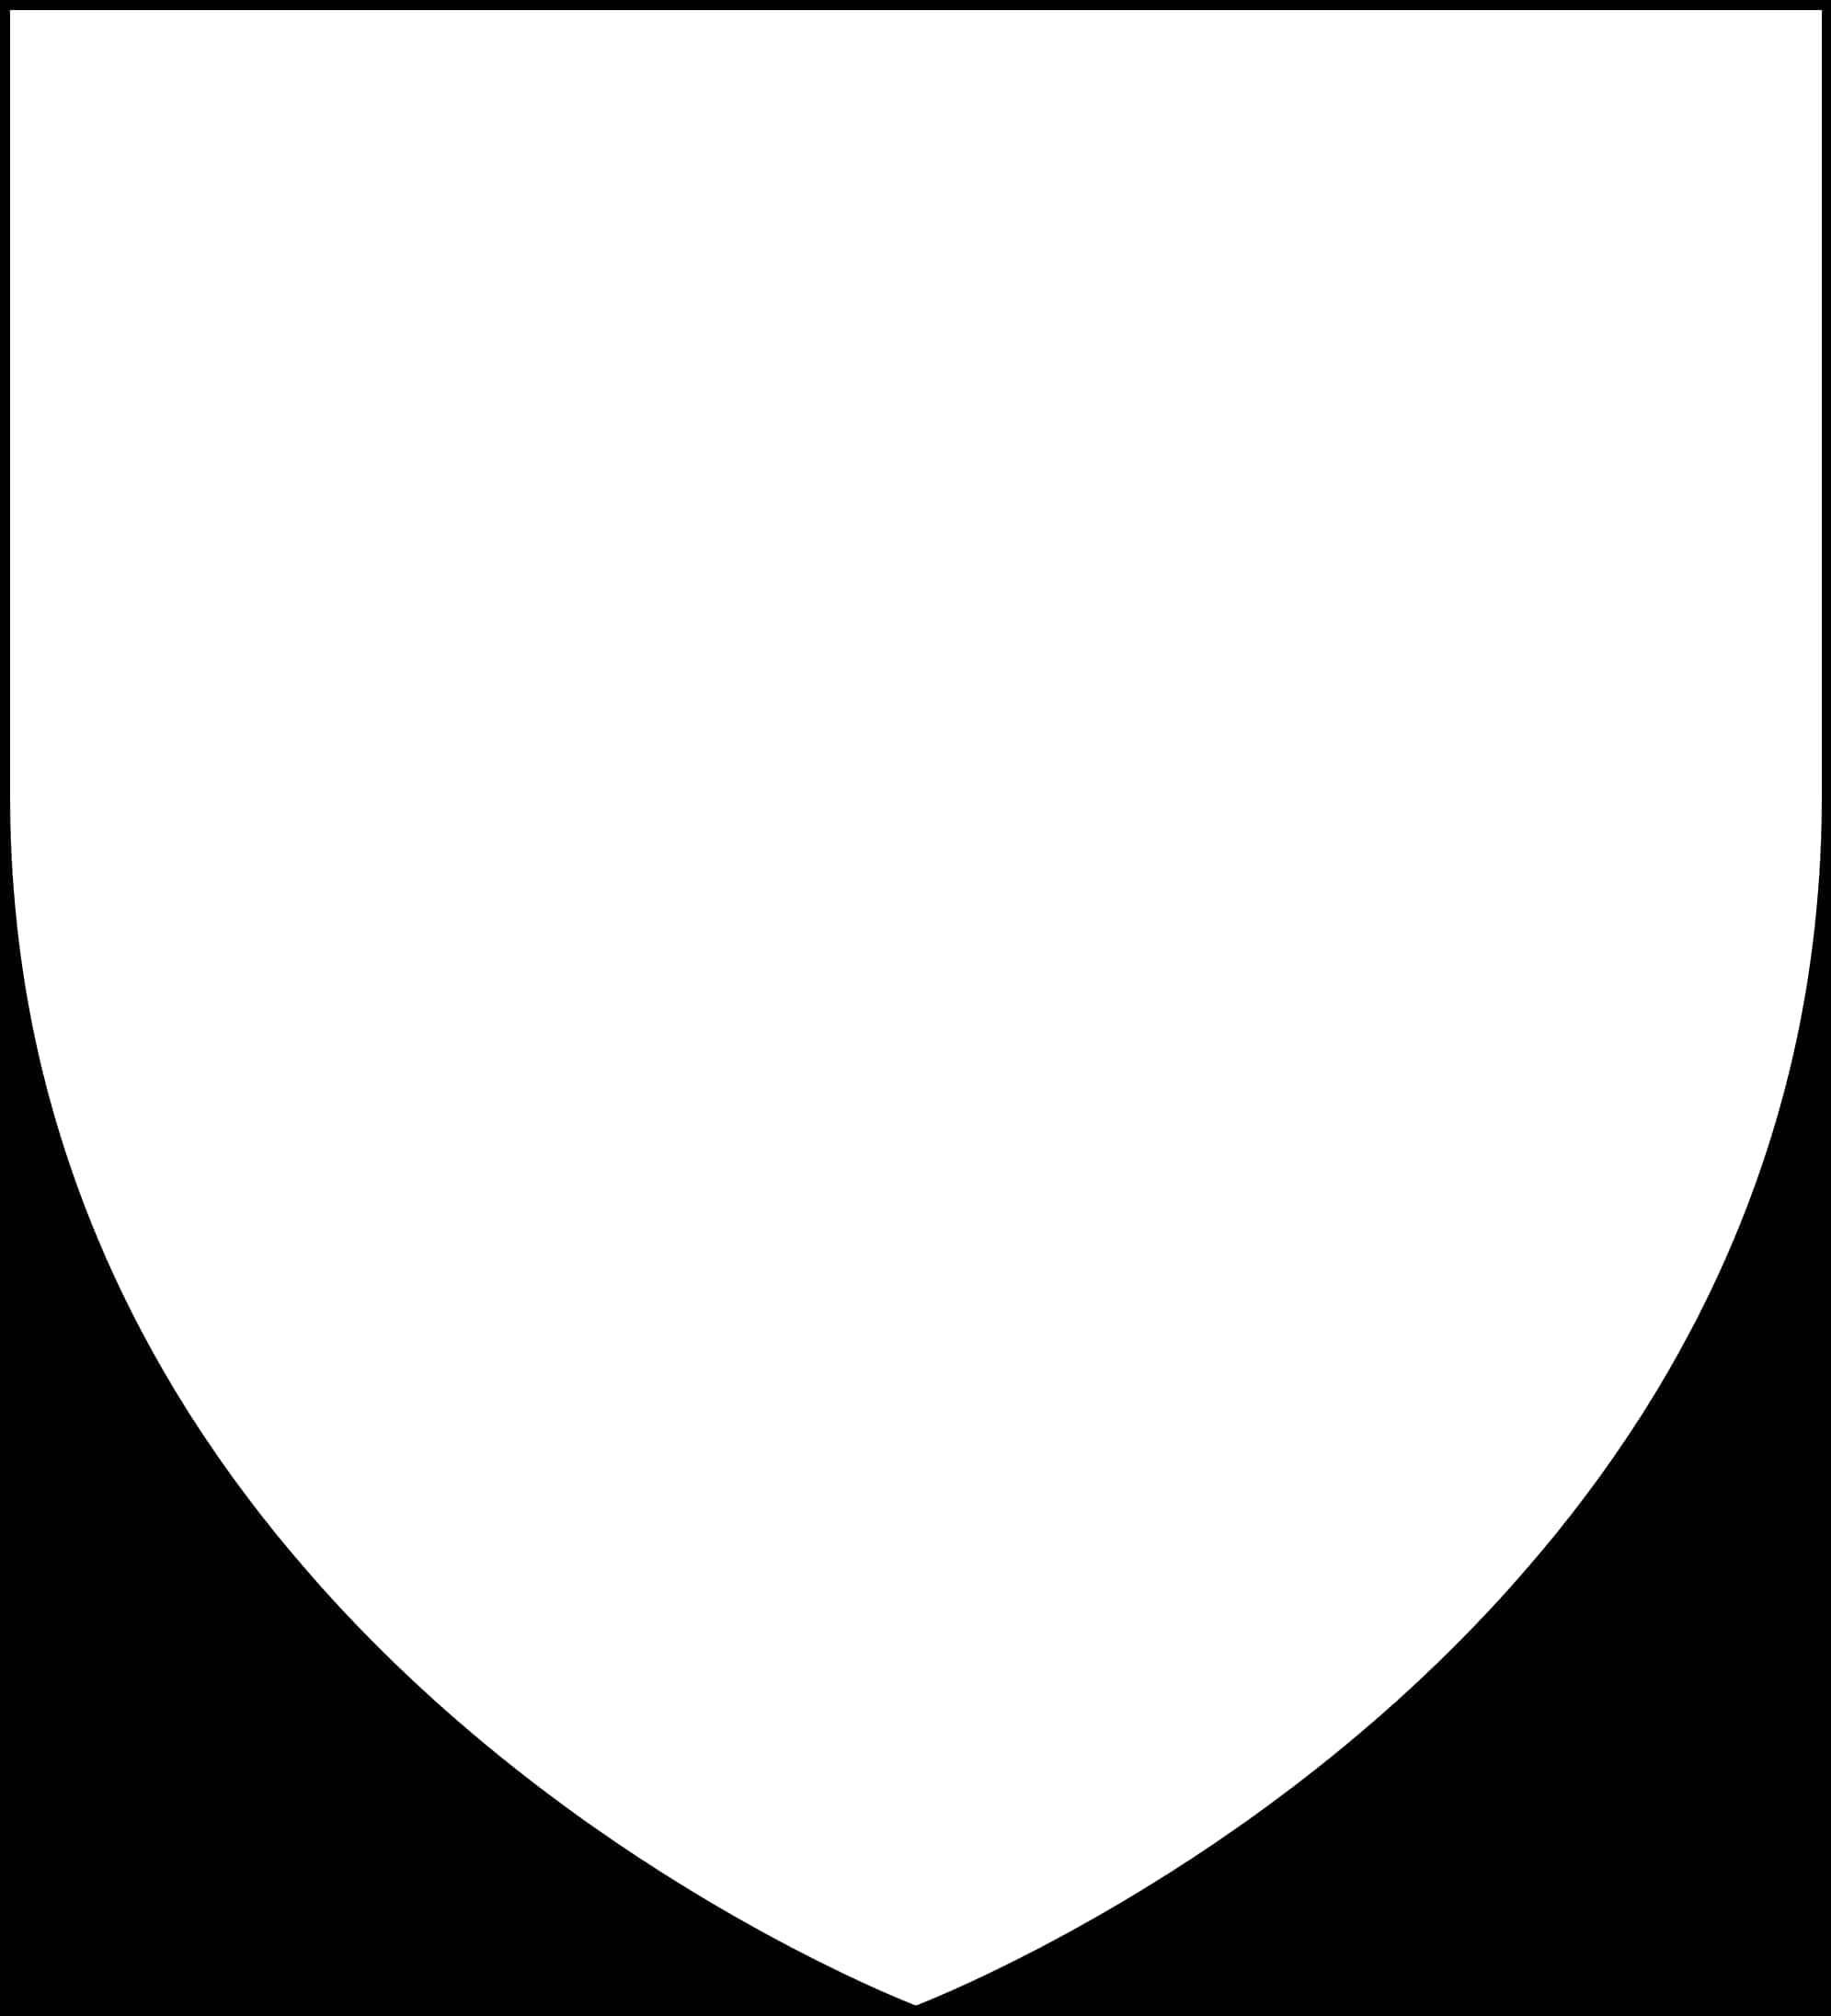 A White Shield With Black Background